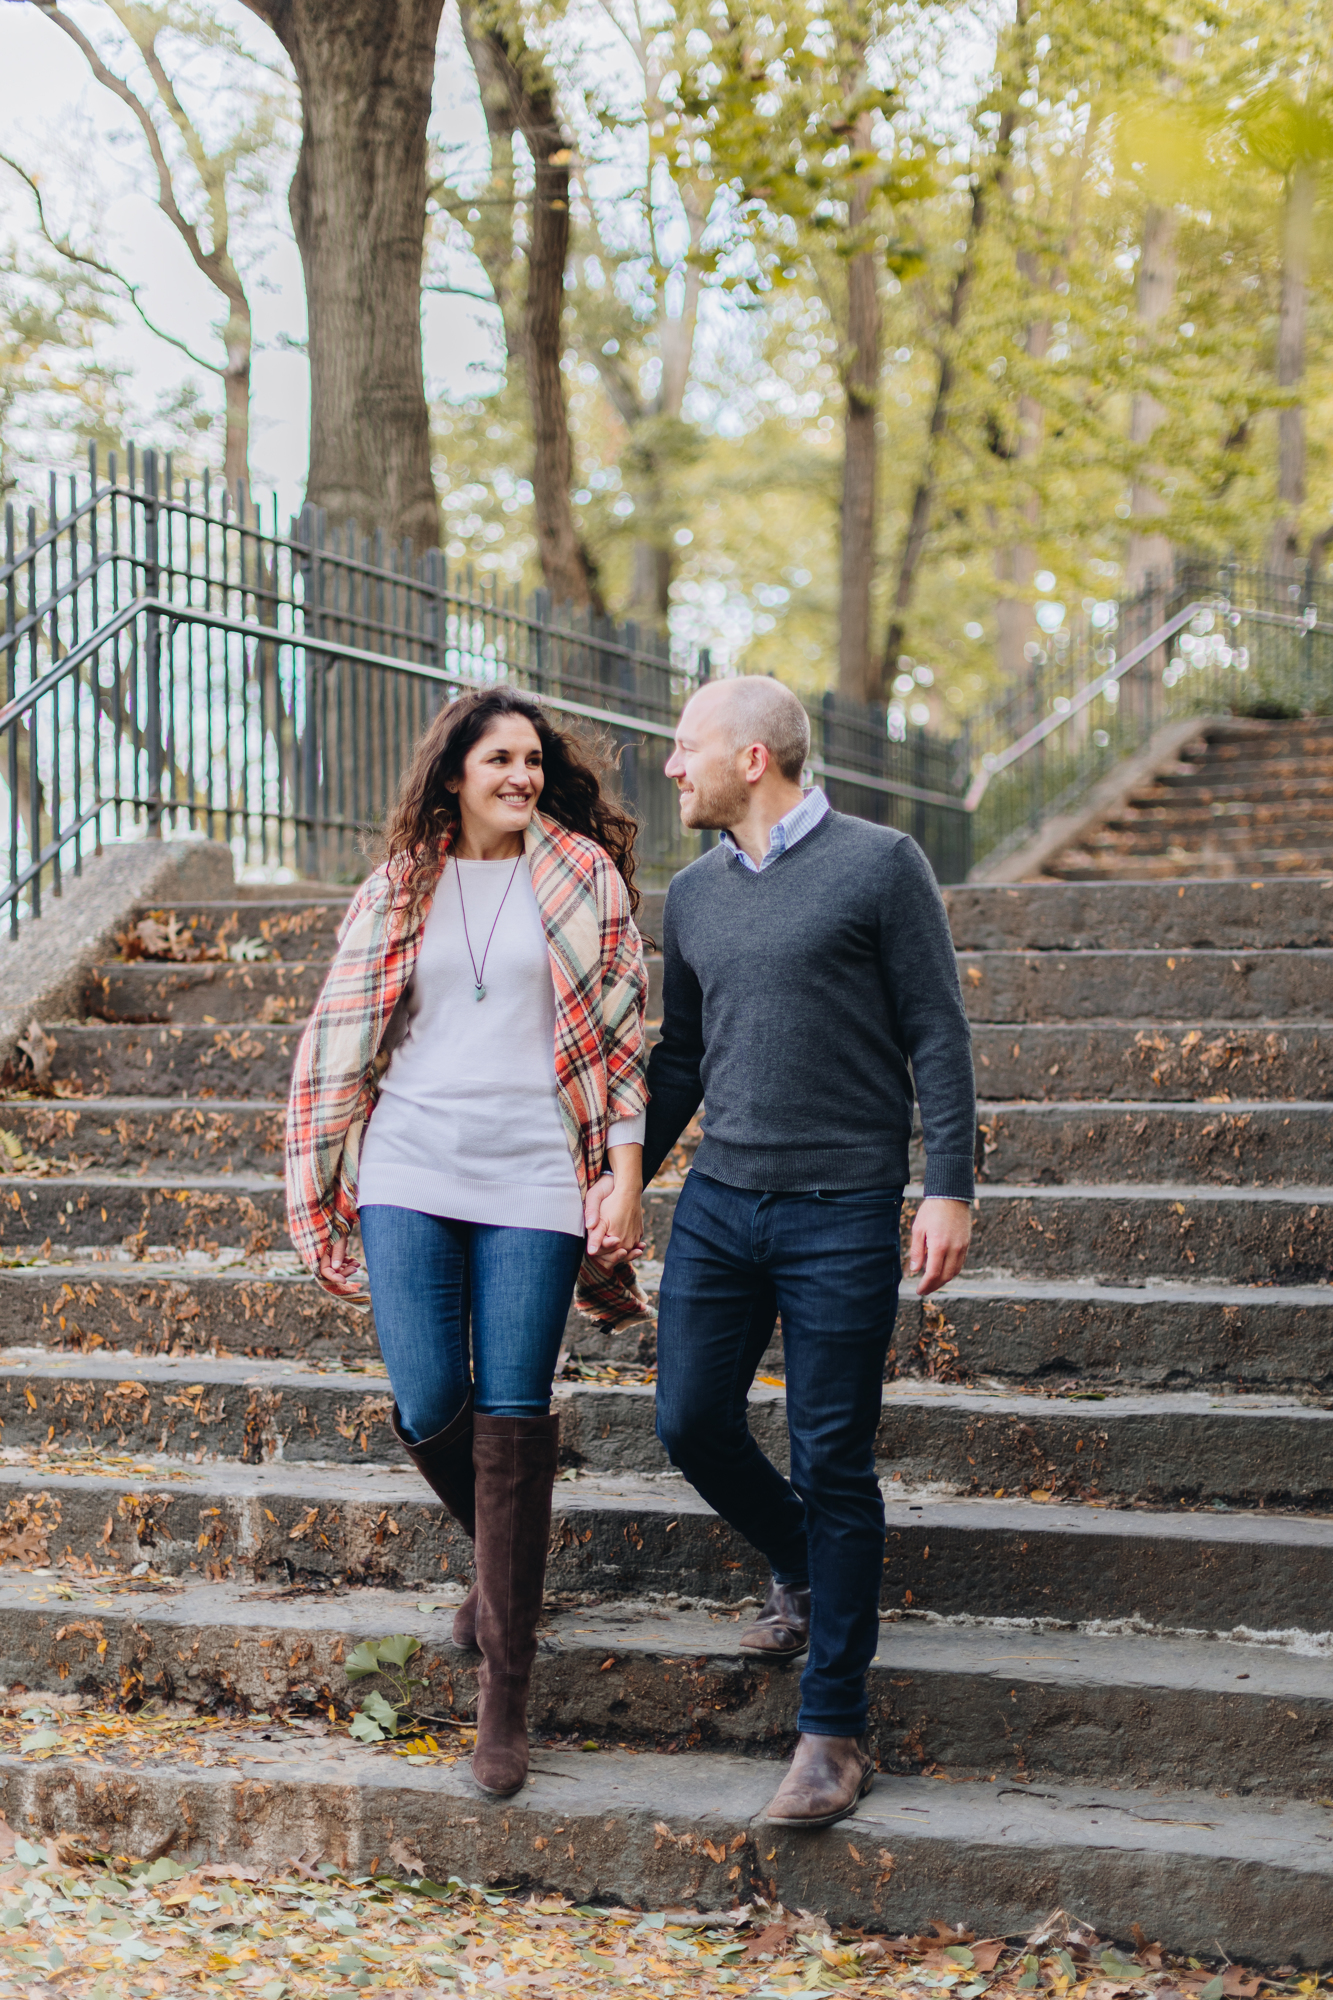 Touching Fall Riverside Park Engagement Photography